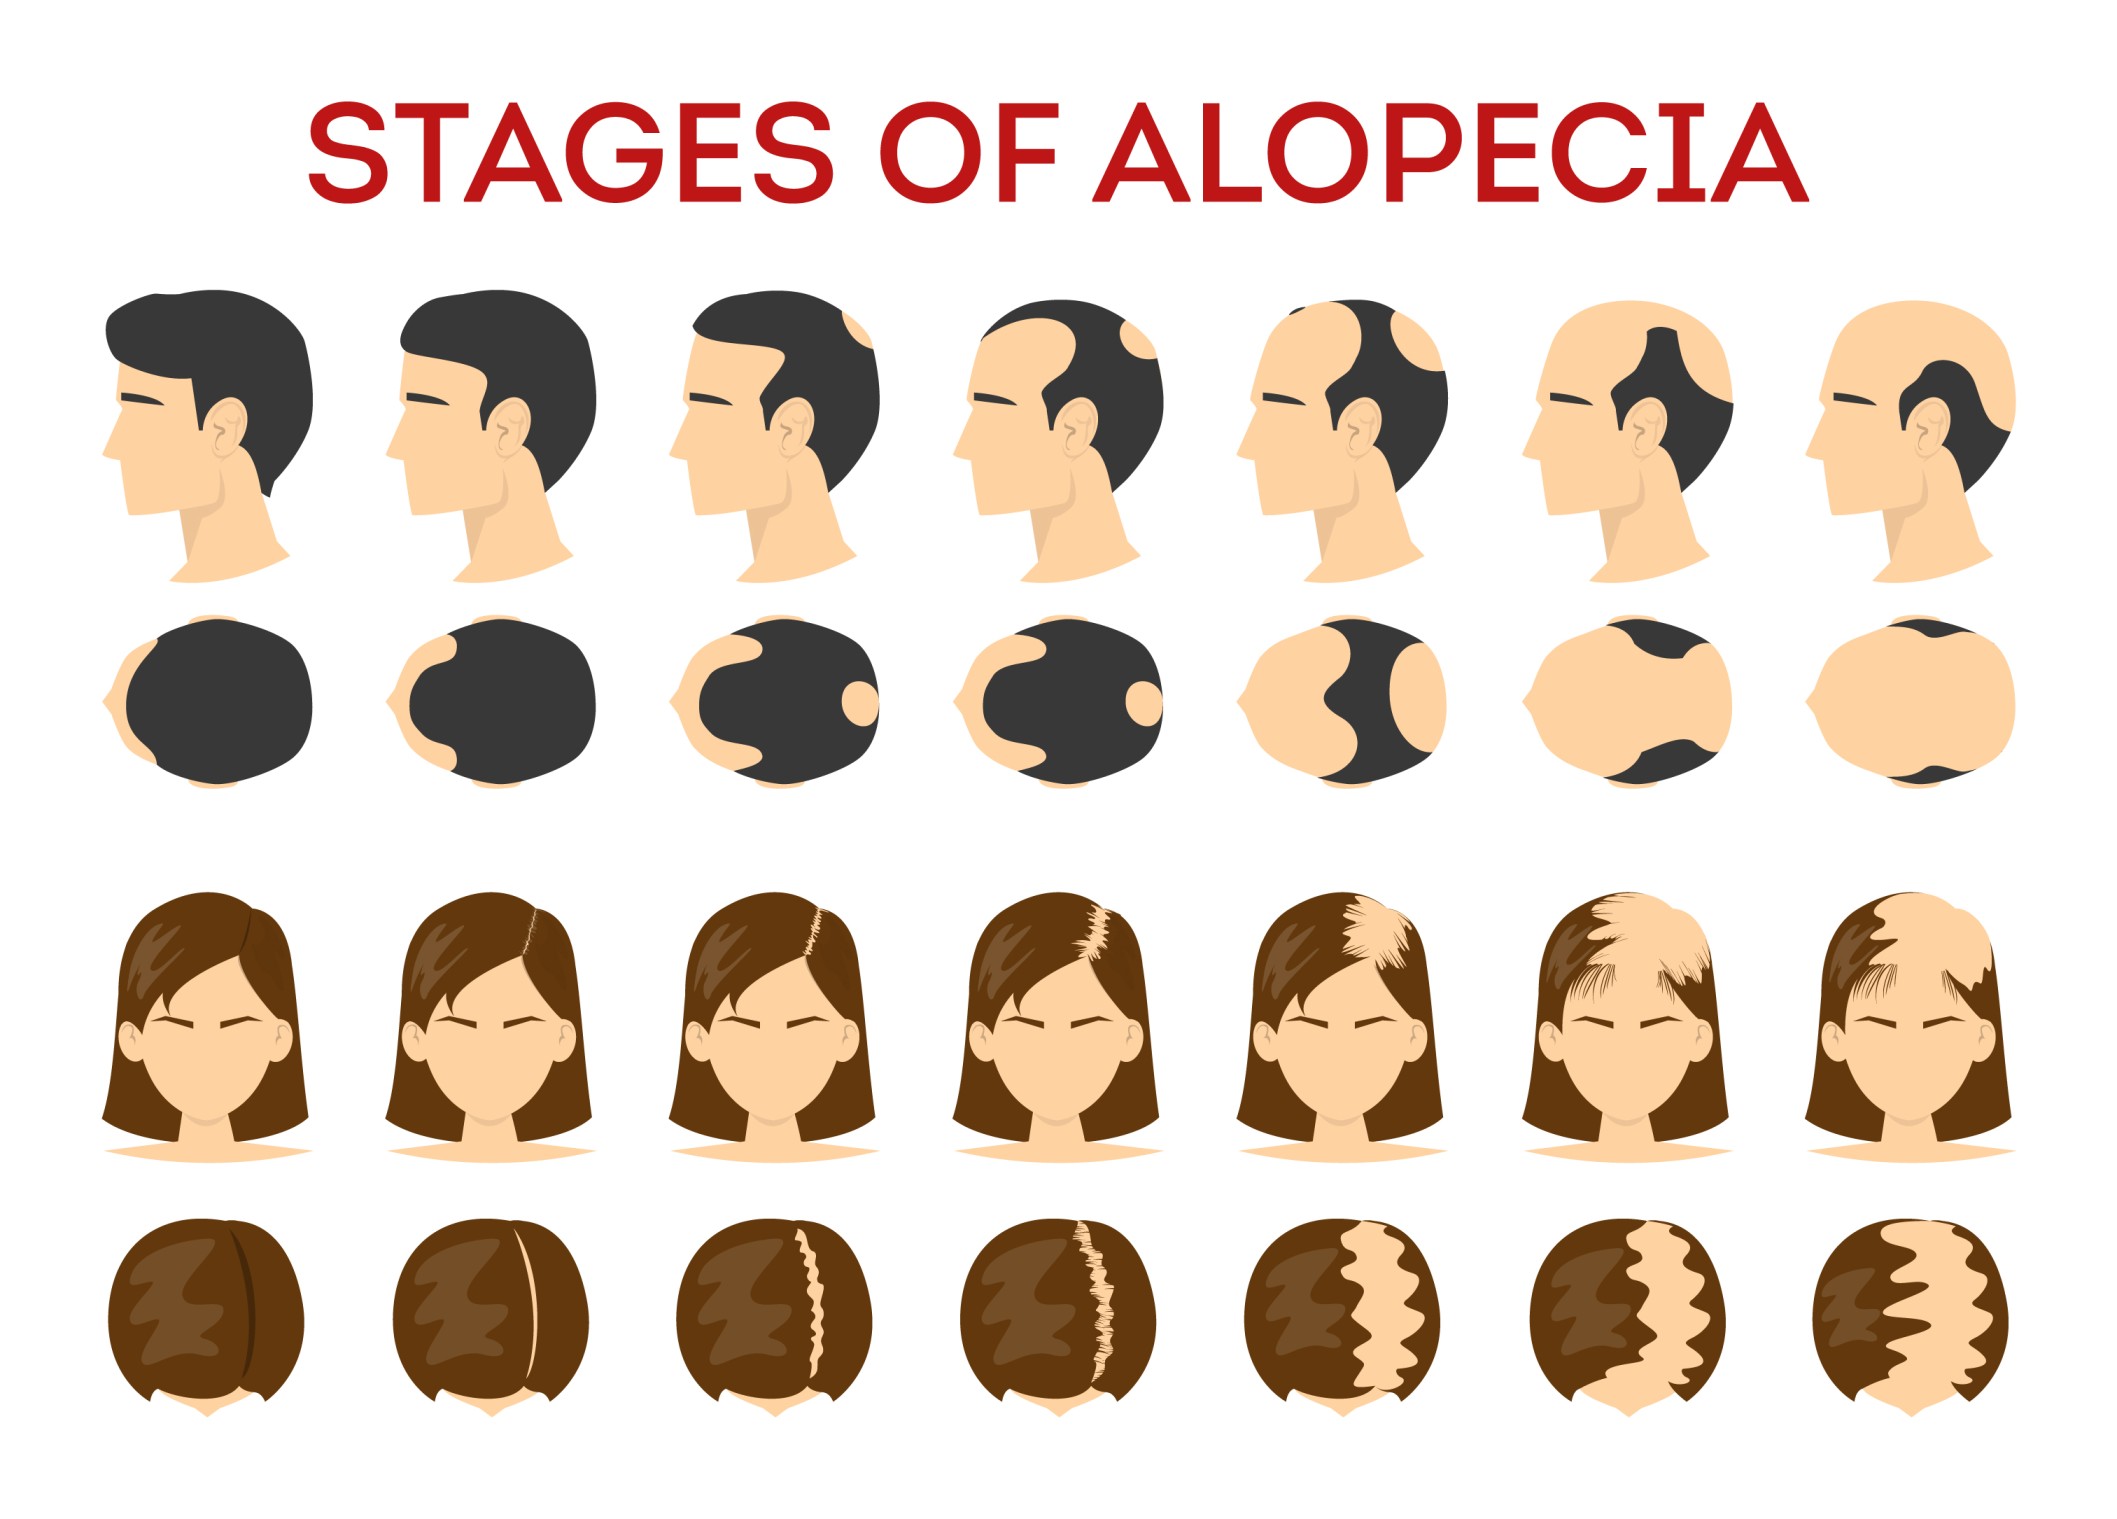 Alopecia-stages-set.-Hair-loss,-balding-process.-Female-and-male-alopecia.